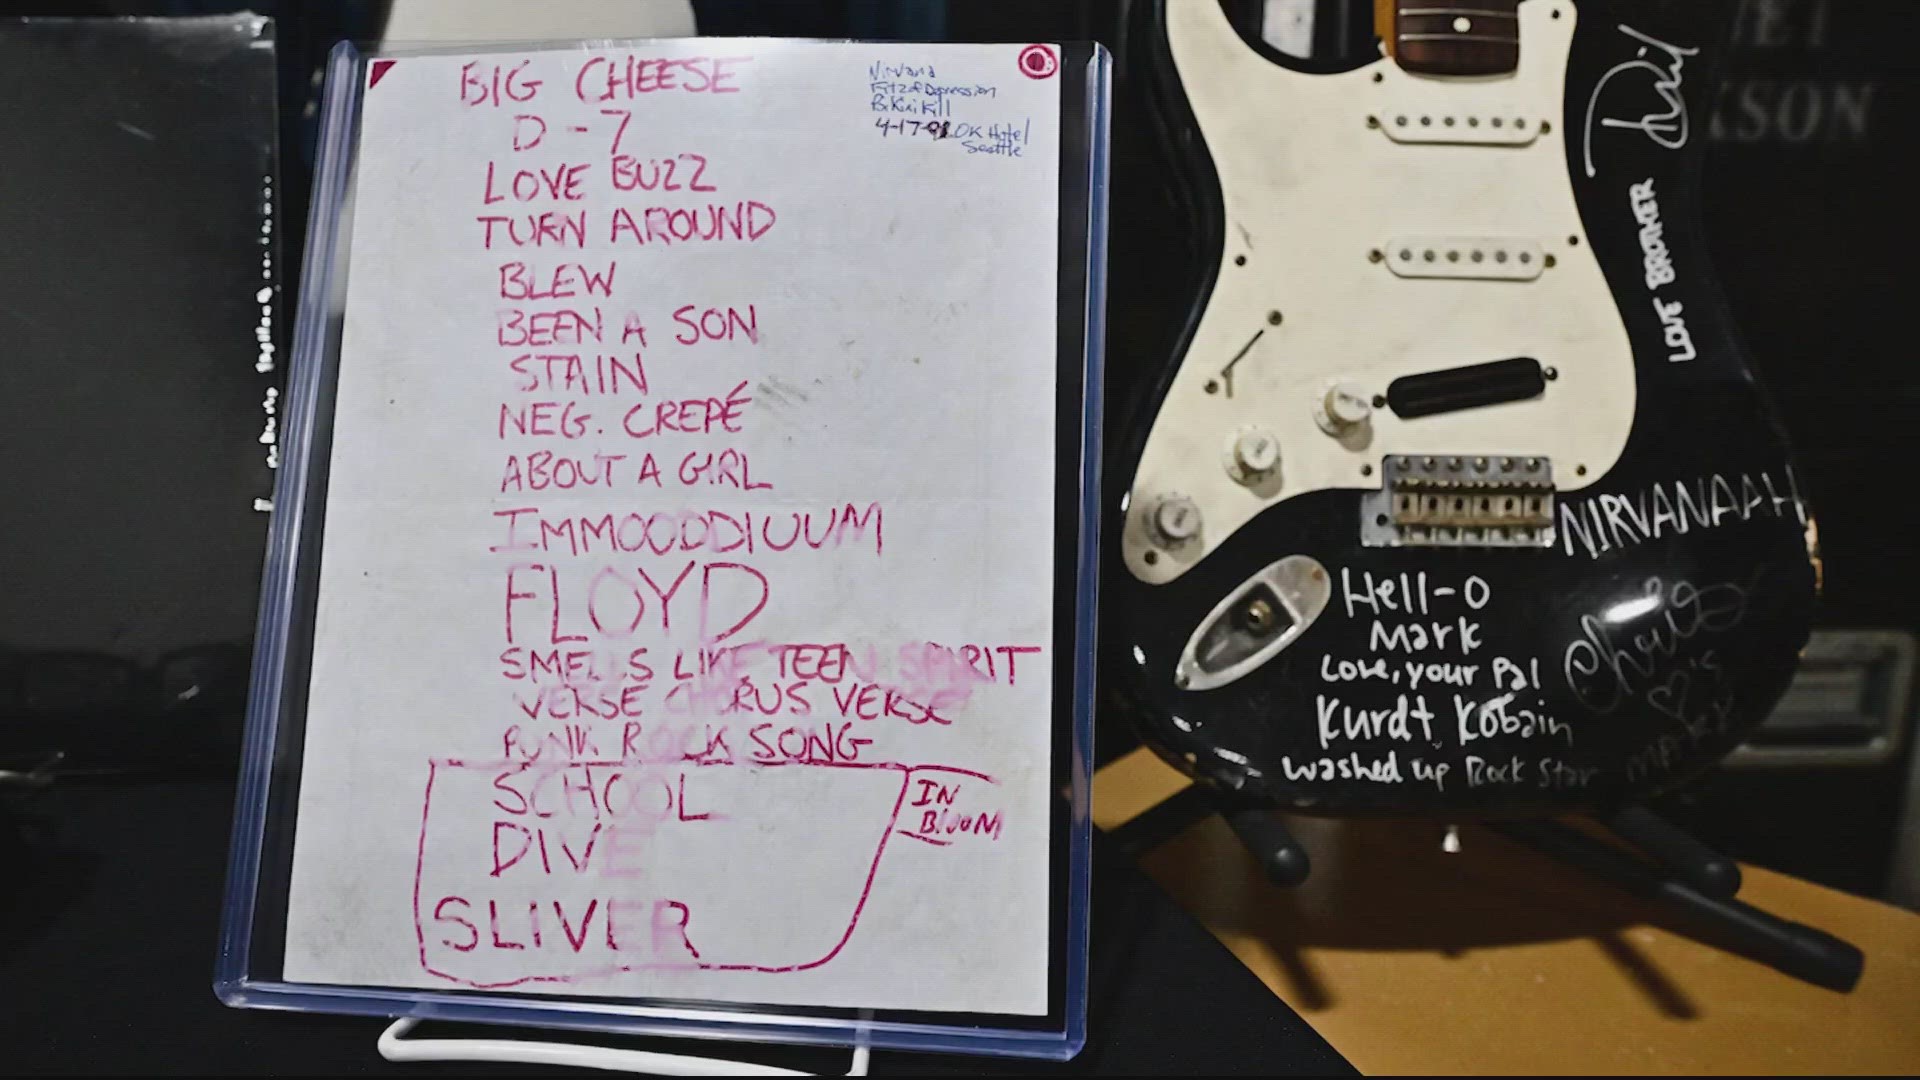 An electric guitar once owned by the late Nirvana front man Kurt Cobain just sold for almost $600,000.